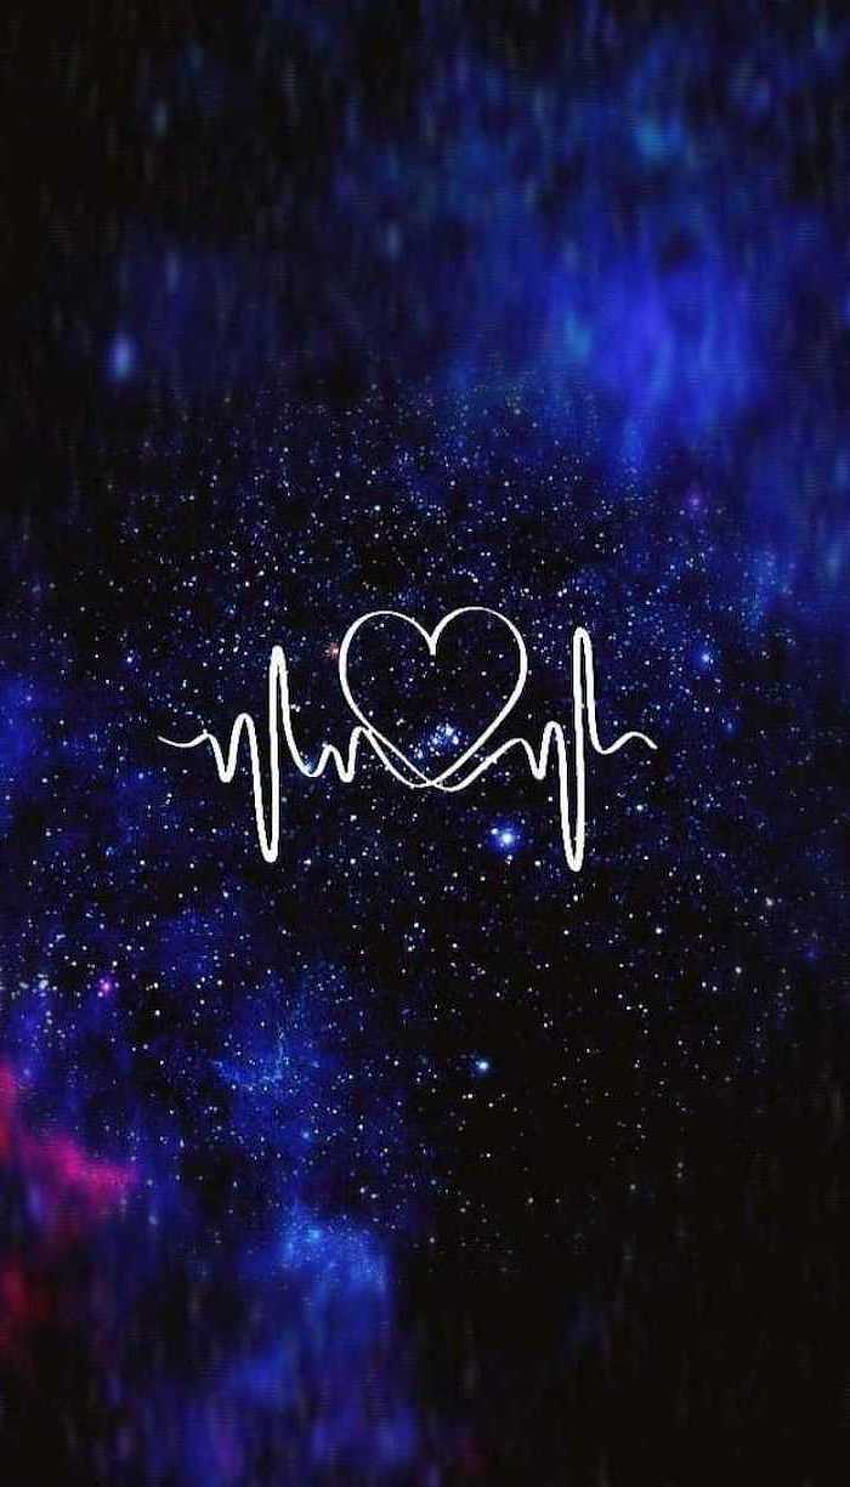 A heart beat in the sky with stars - Galaxy, black heart